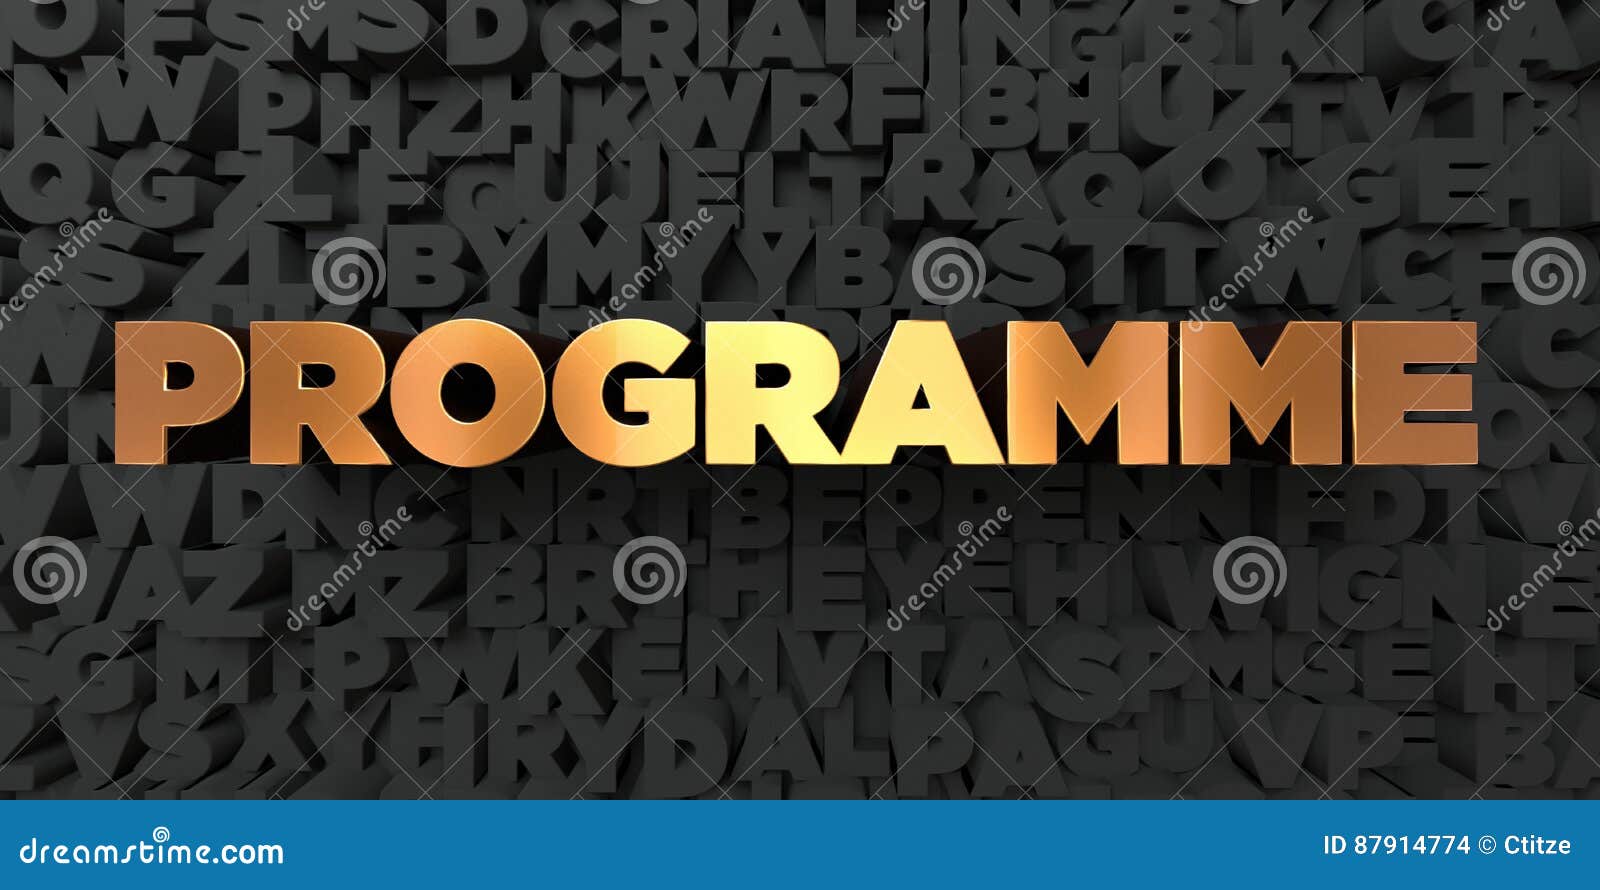 programme - gold text on black background - 3d rendered royalty free stock picture